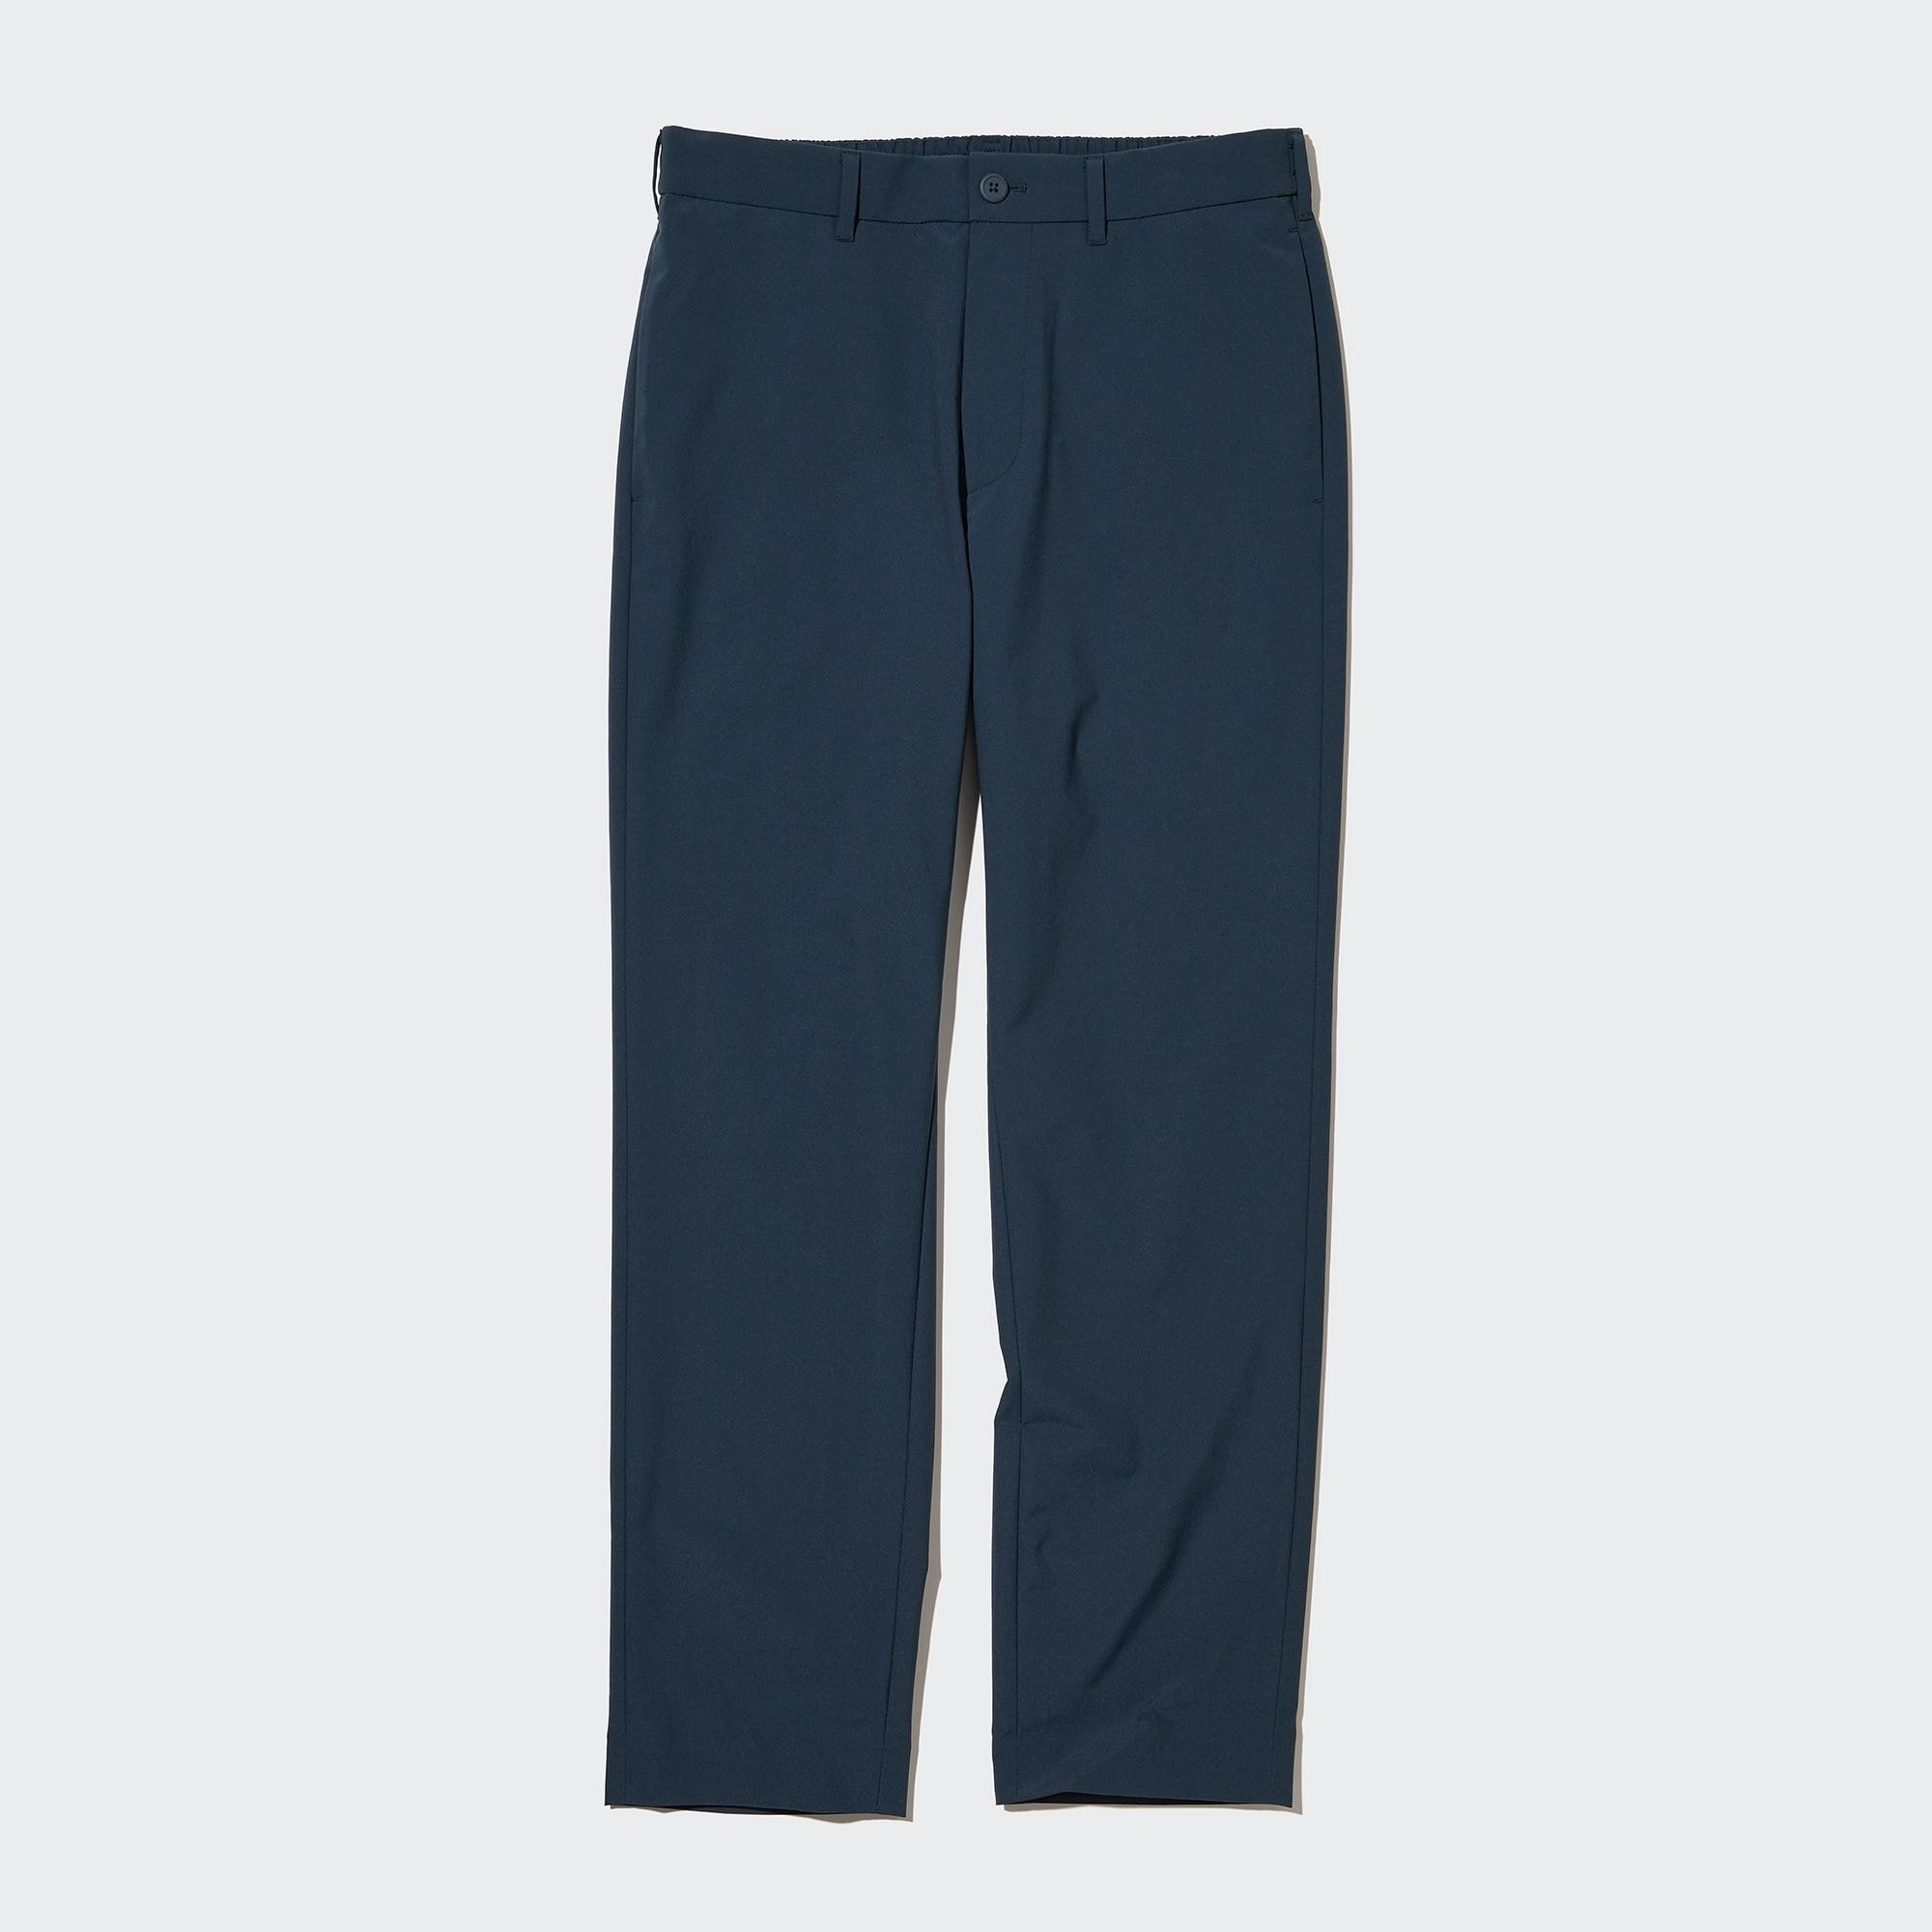 Check styling ideas for「AirSense RELAXED PANTS (ULTRA LIGHT